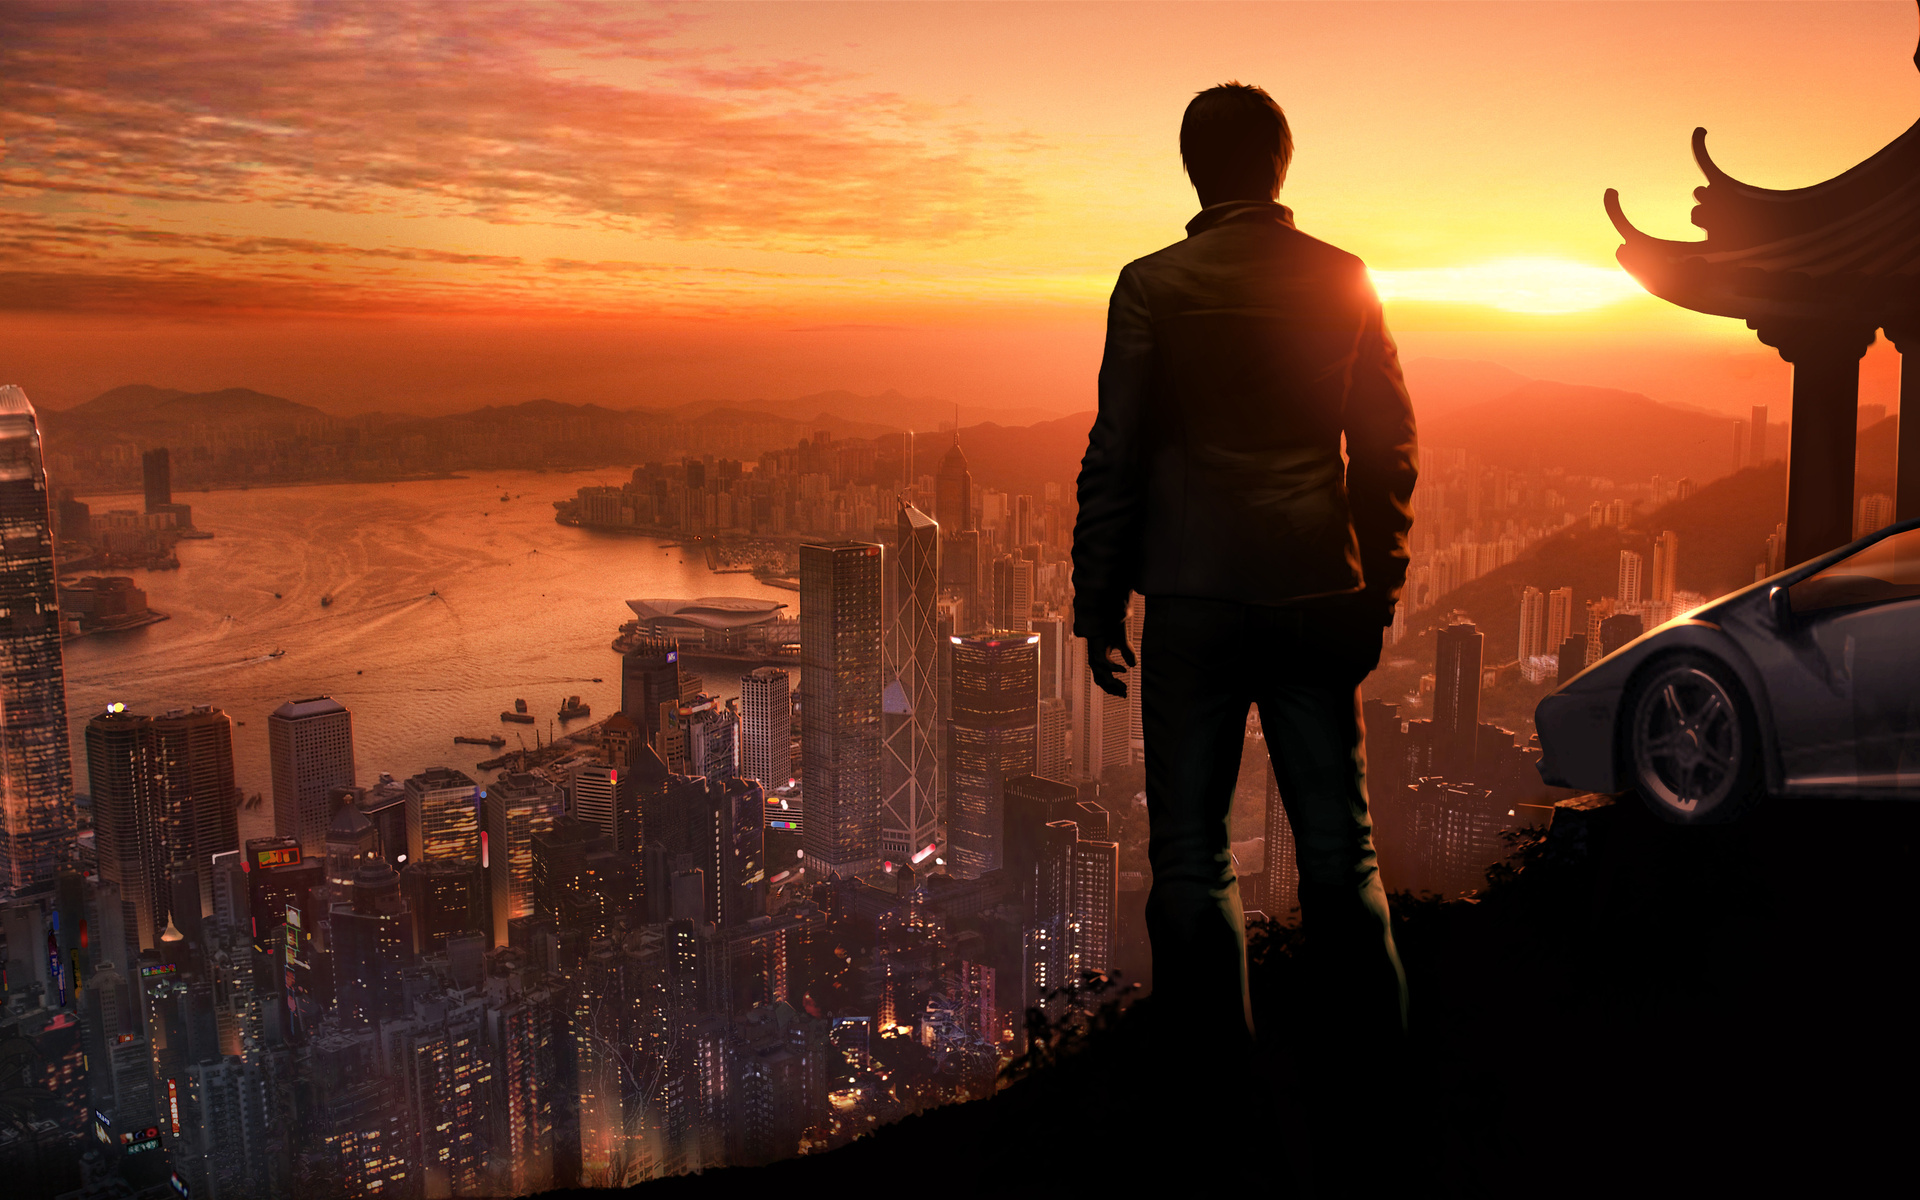 sleeping dogs, Sleeping, Dogs, Games, Video games, People, Men, Males, Cities, Cityscape, Sunset, Sunrise, Rivers Wallpaper